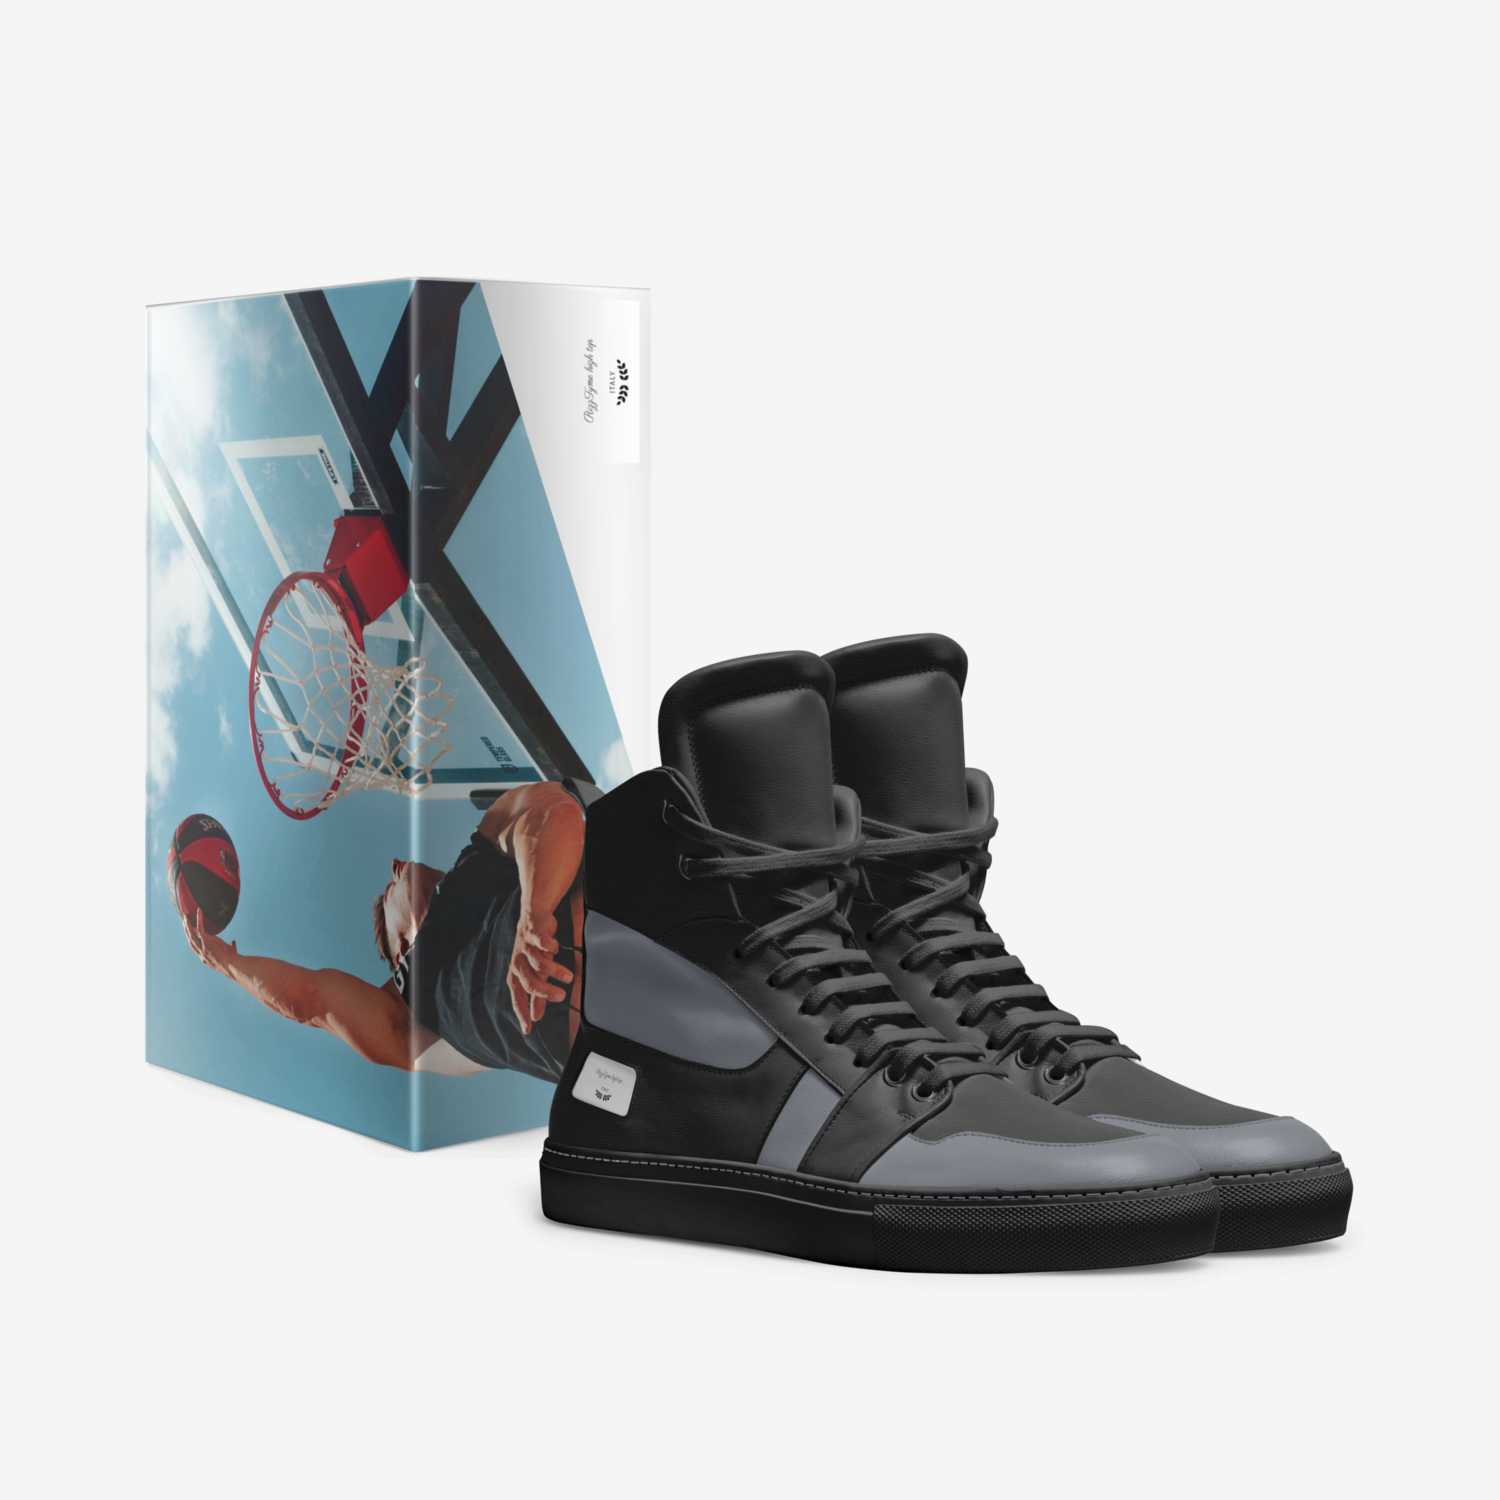 RizzTyme high top custom made in Italy shoes by Rodney Jones | Box view